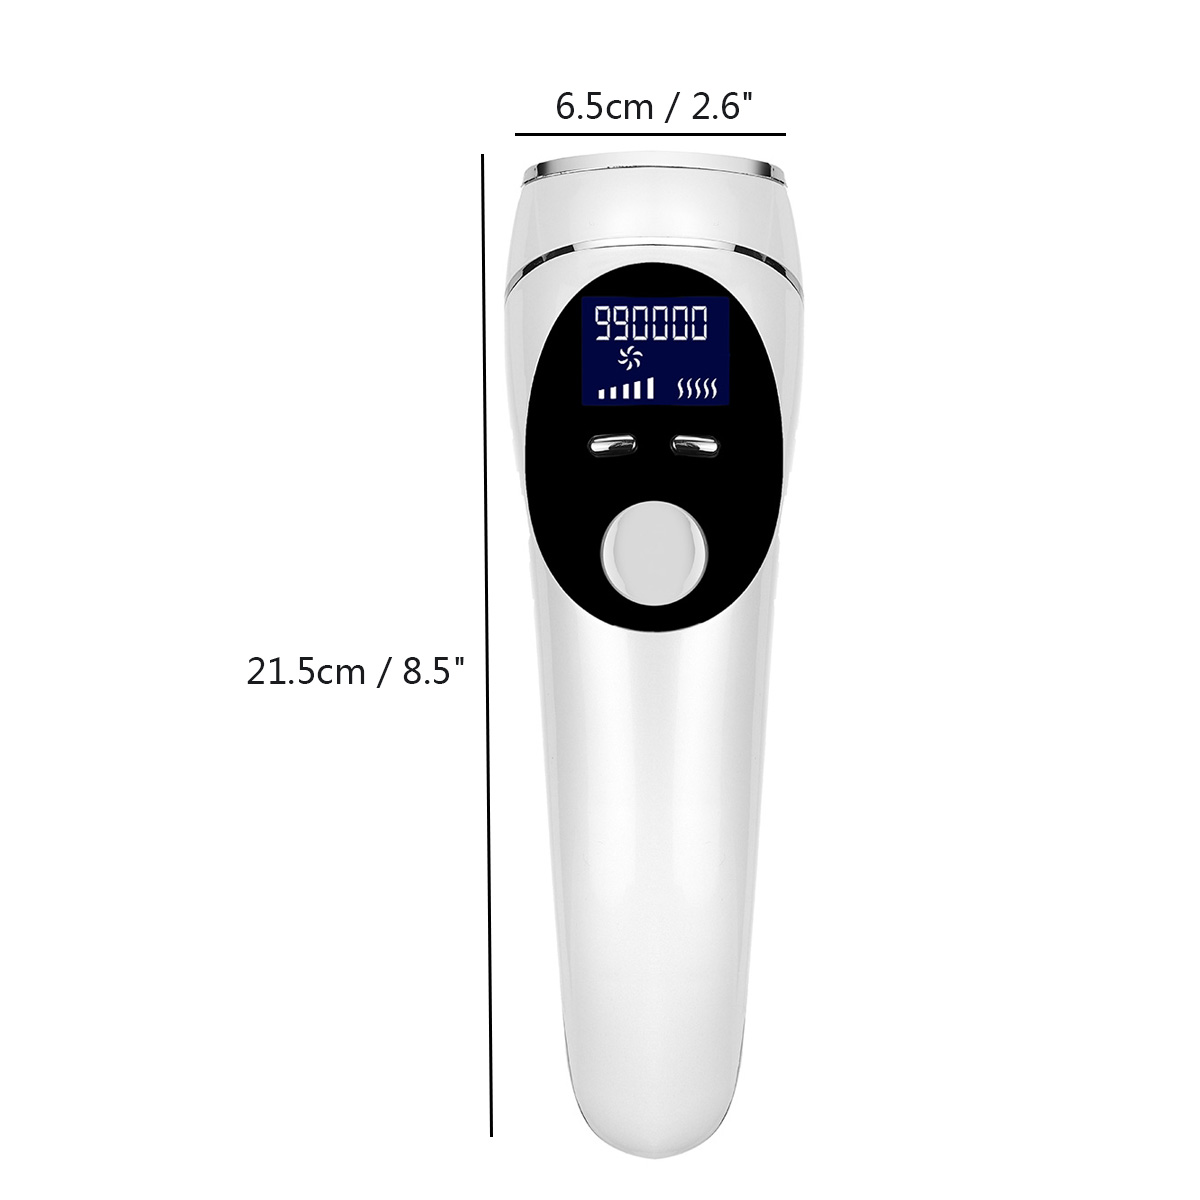 999999-Flashes-DIY-IPL-Laser-Hair-Removal-Device-5-Levels-Painless-Epilator-Hair-Remover-1837621-11